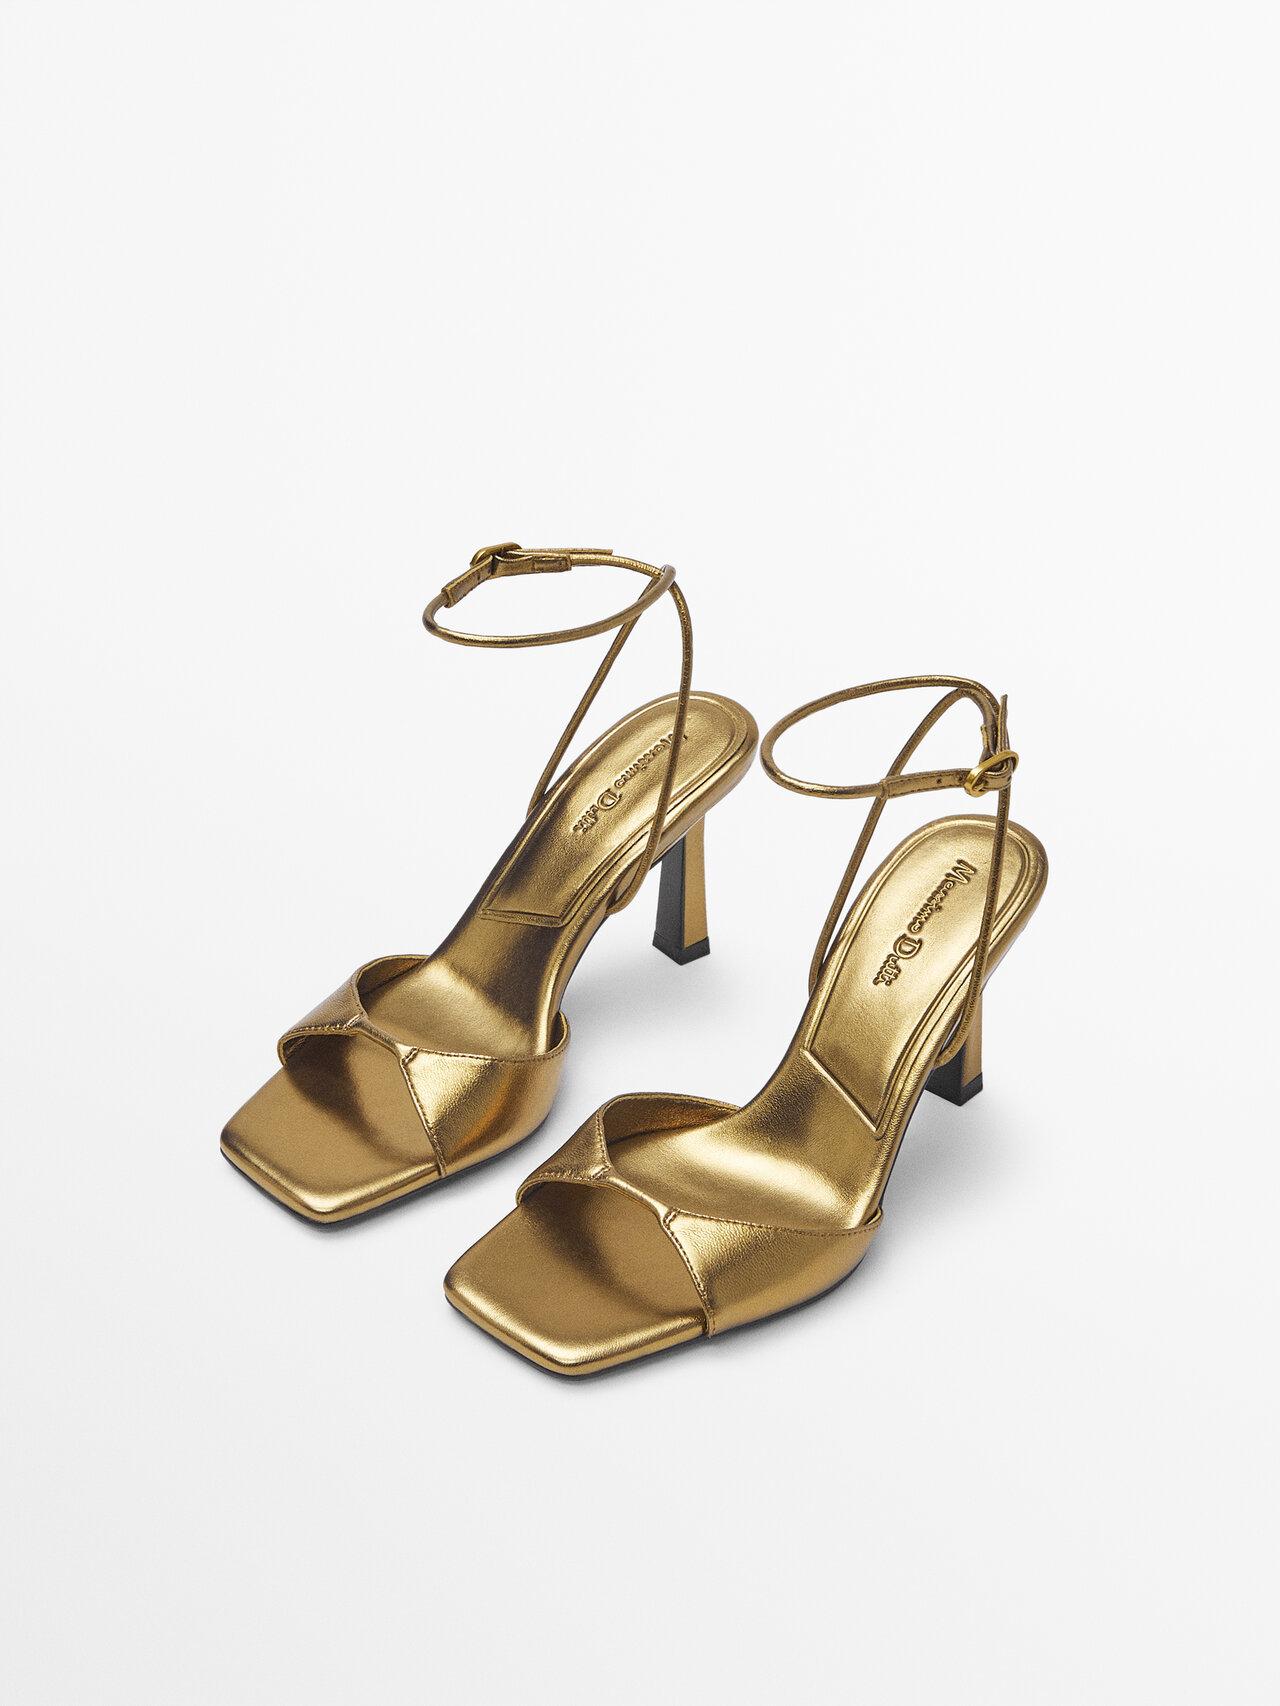 MASSIMO DUTTI High-heel Leather Sandals With Square Toe in Metallic | Lyst